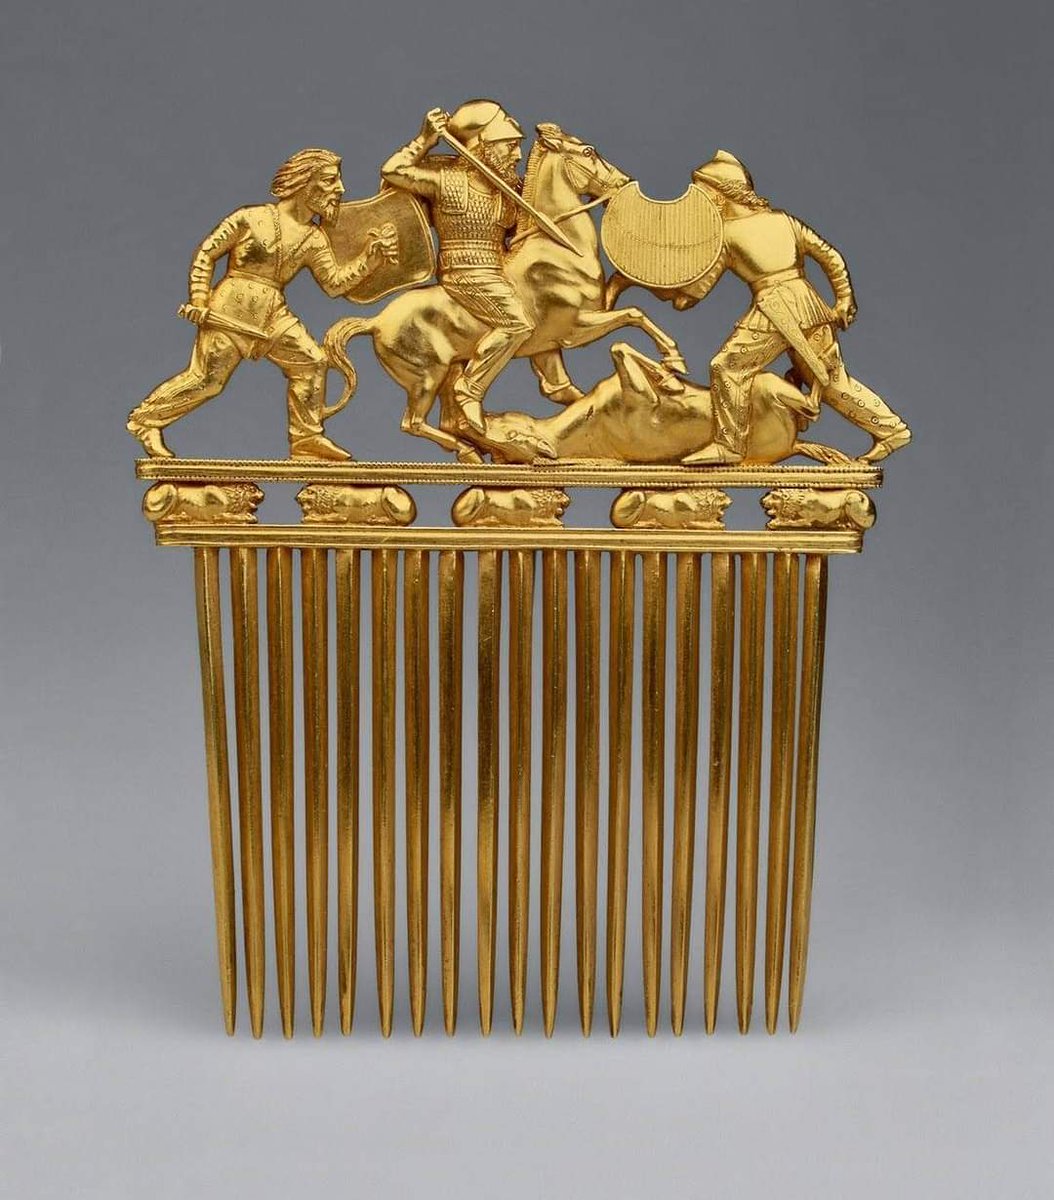 Golden Comb (Solocha Comb) of  Scythians (4th Century BC), made by a Greek sculptor, with a crest showing Scythian warriors in battle, was found in grave of Scythian leader in mound of Solokha, Kurgan in Ukraine, in 1913. Scythians (9th-3rd Century BC), an ancient nomadic people